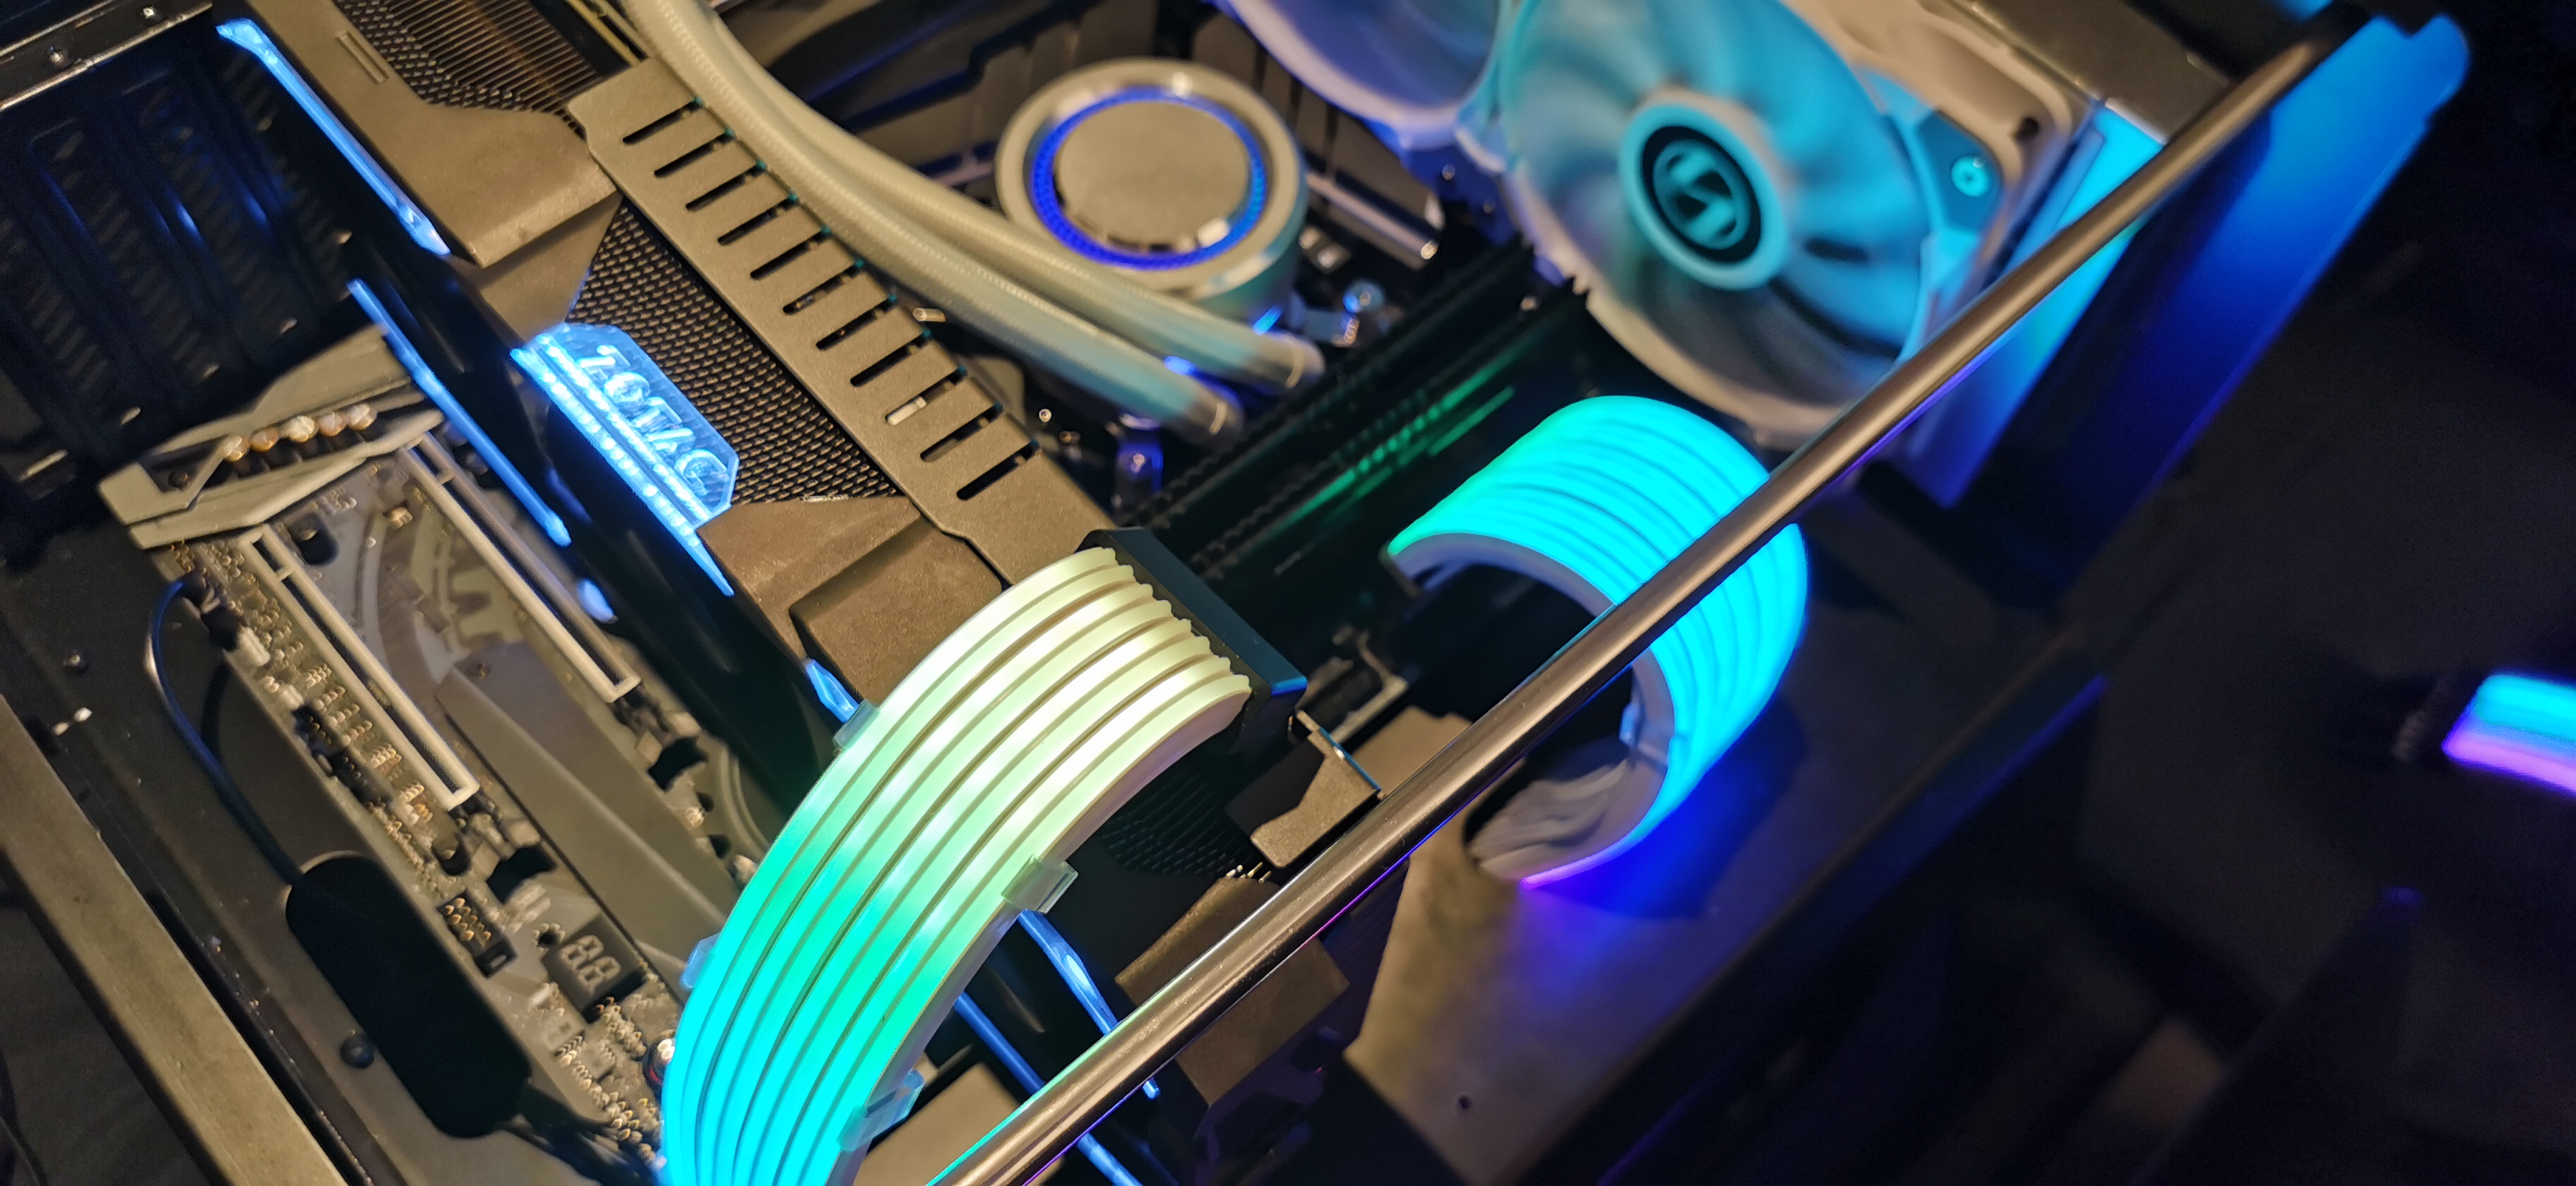 Lian Li Strimer Plus V2 in review - The popular RGB cables now